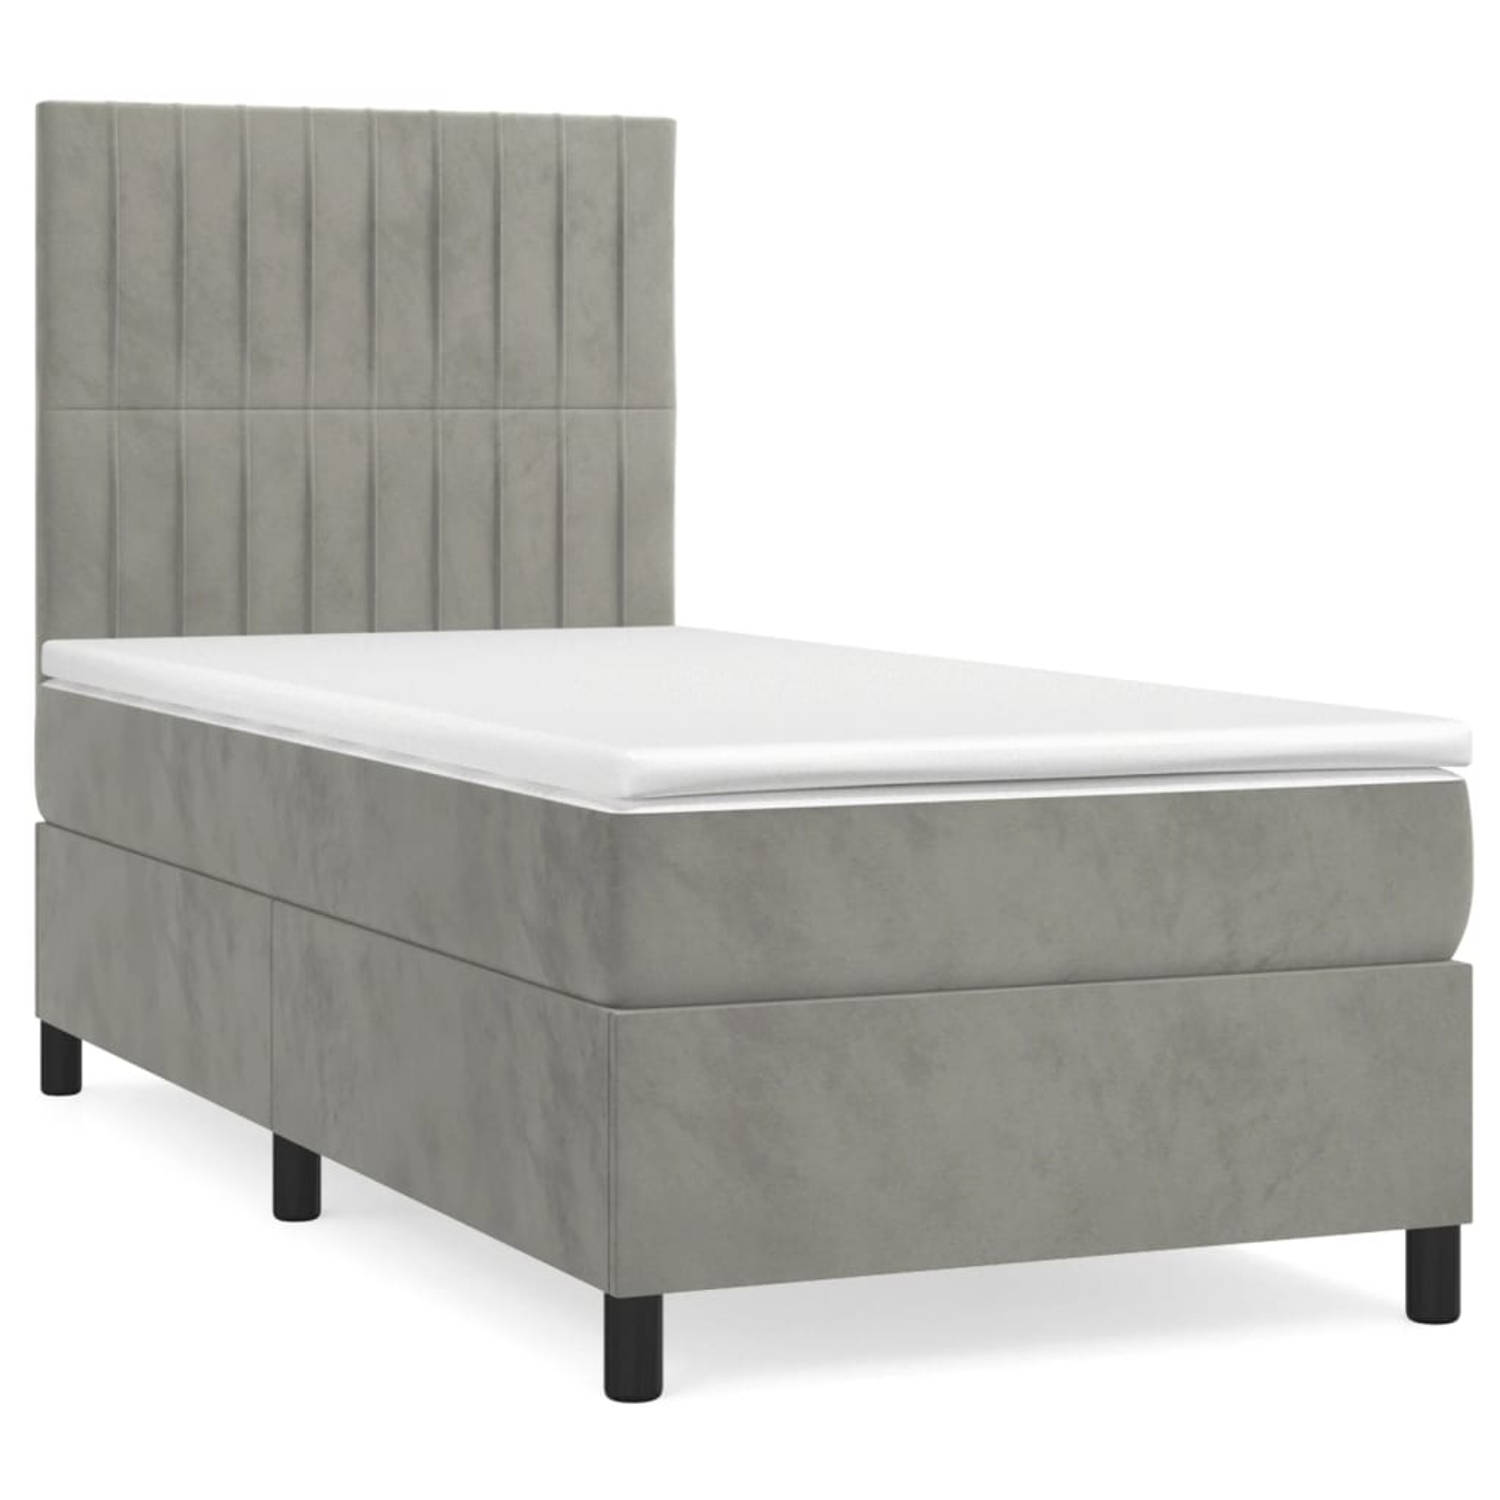 The Living Store Boxspringbed - Bed - 203x90x118/128 cm - Lichtgrijs fluweel